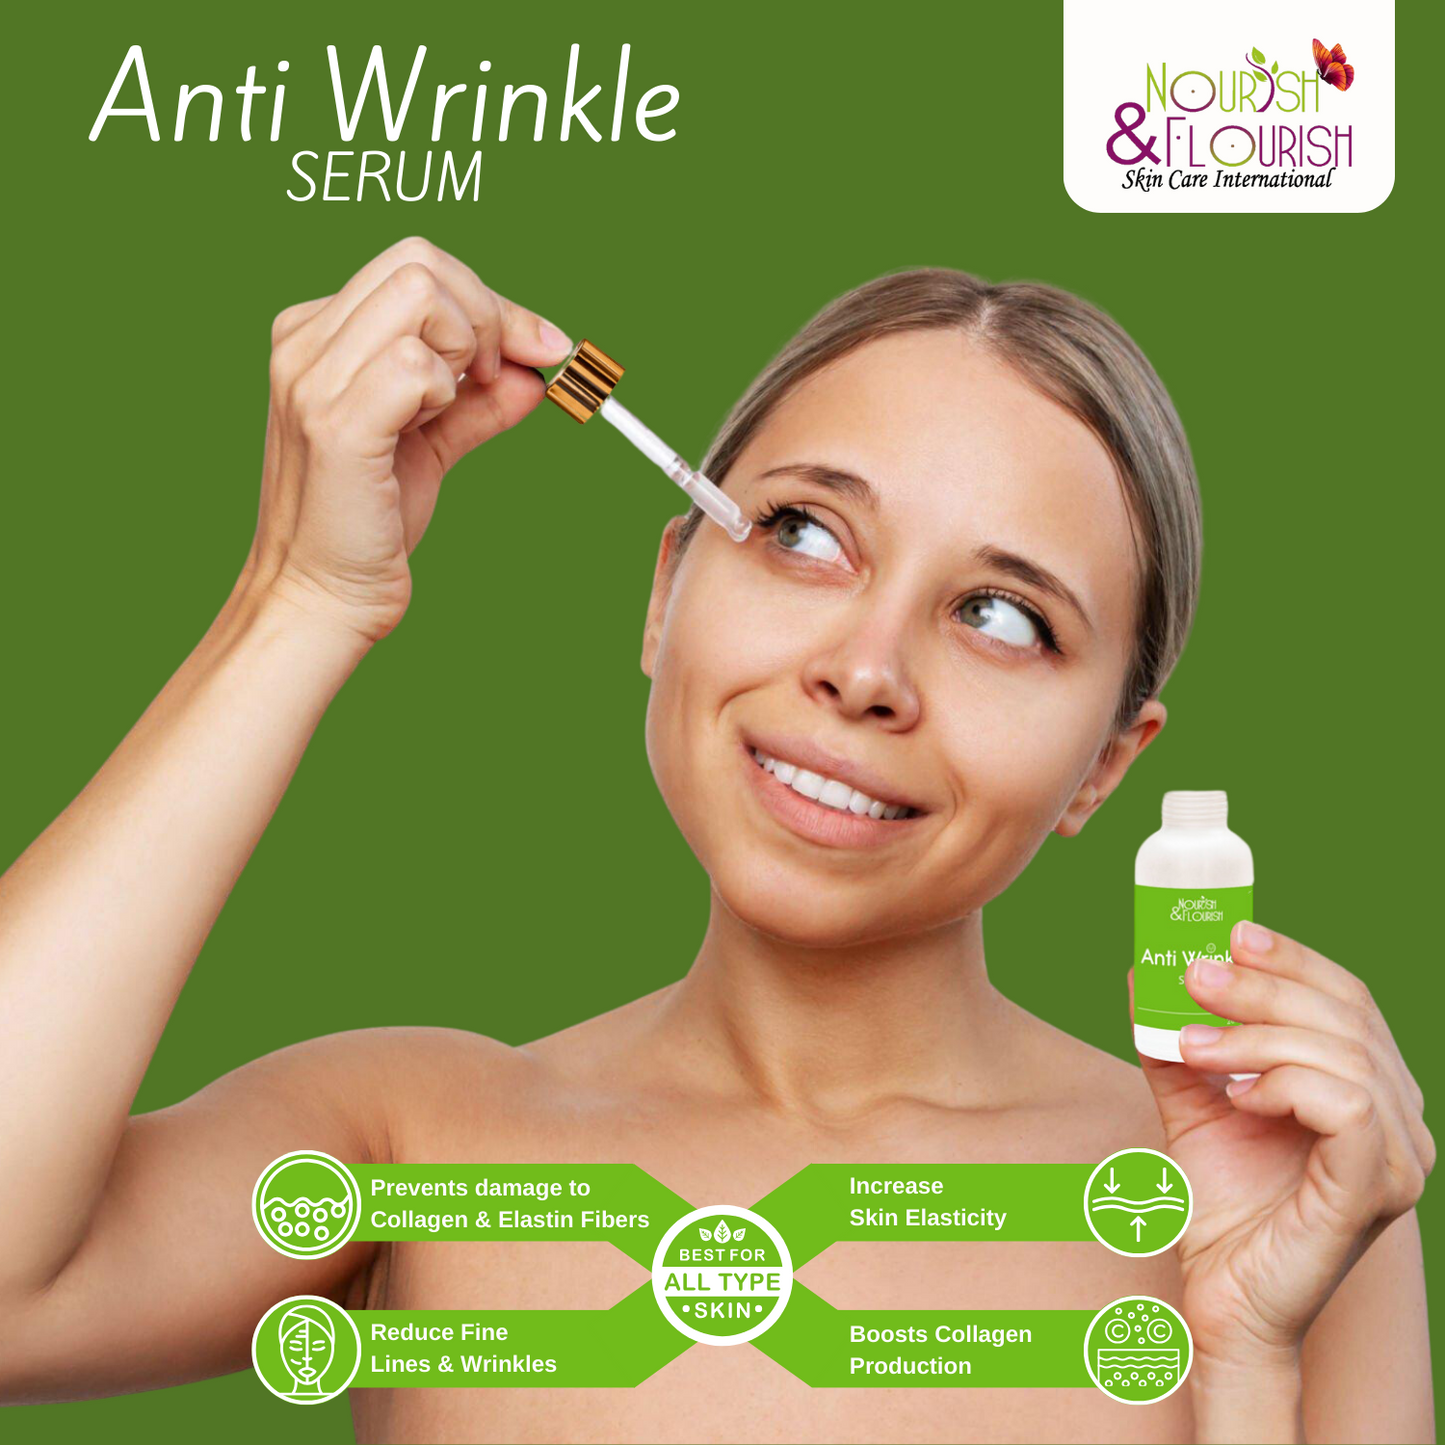 Anti Wrinkle Serum - Quick Results for Wrinkles & Fine Lines